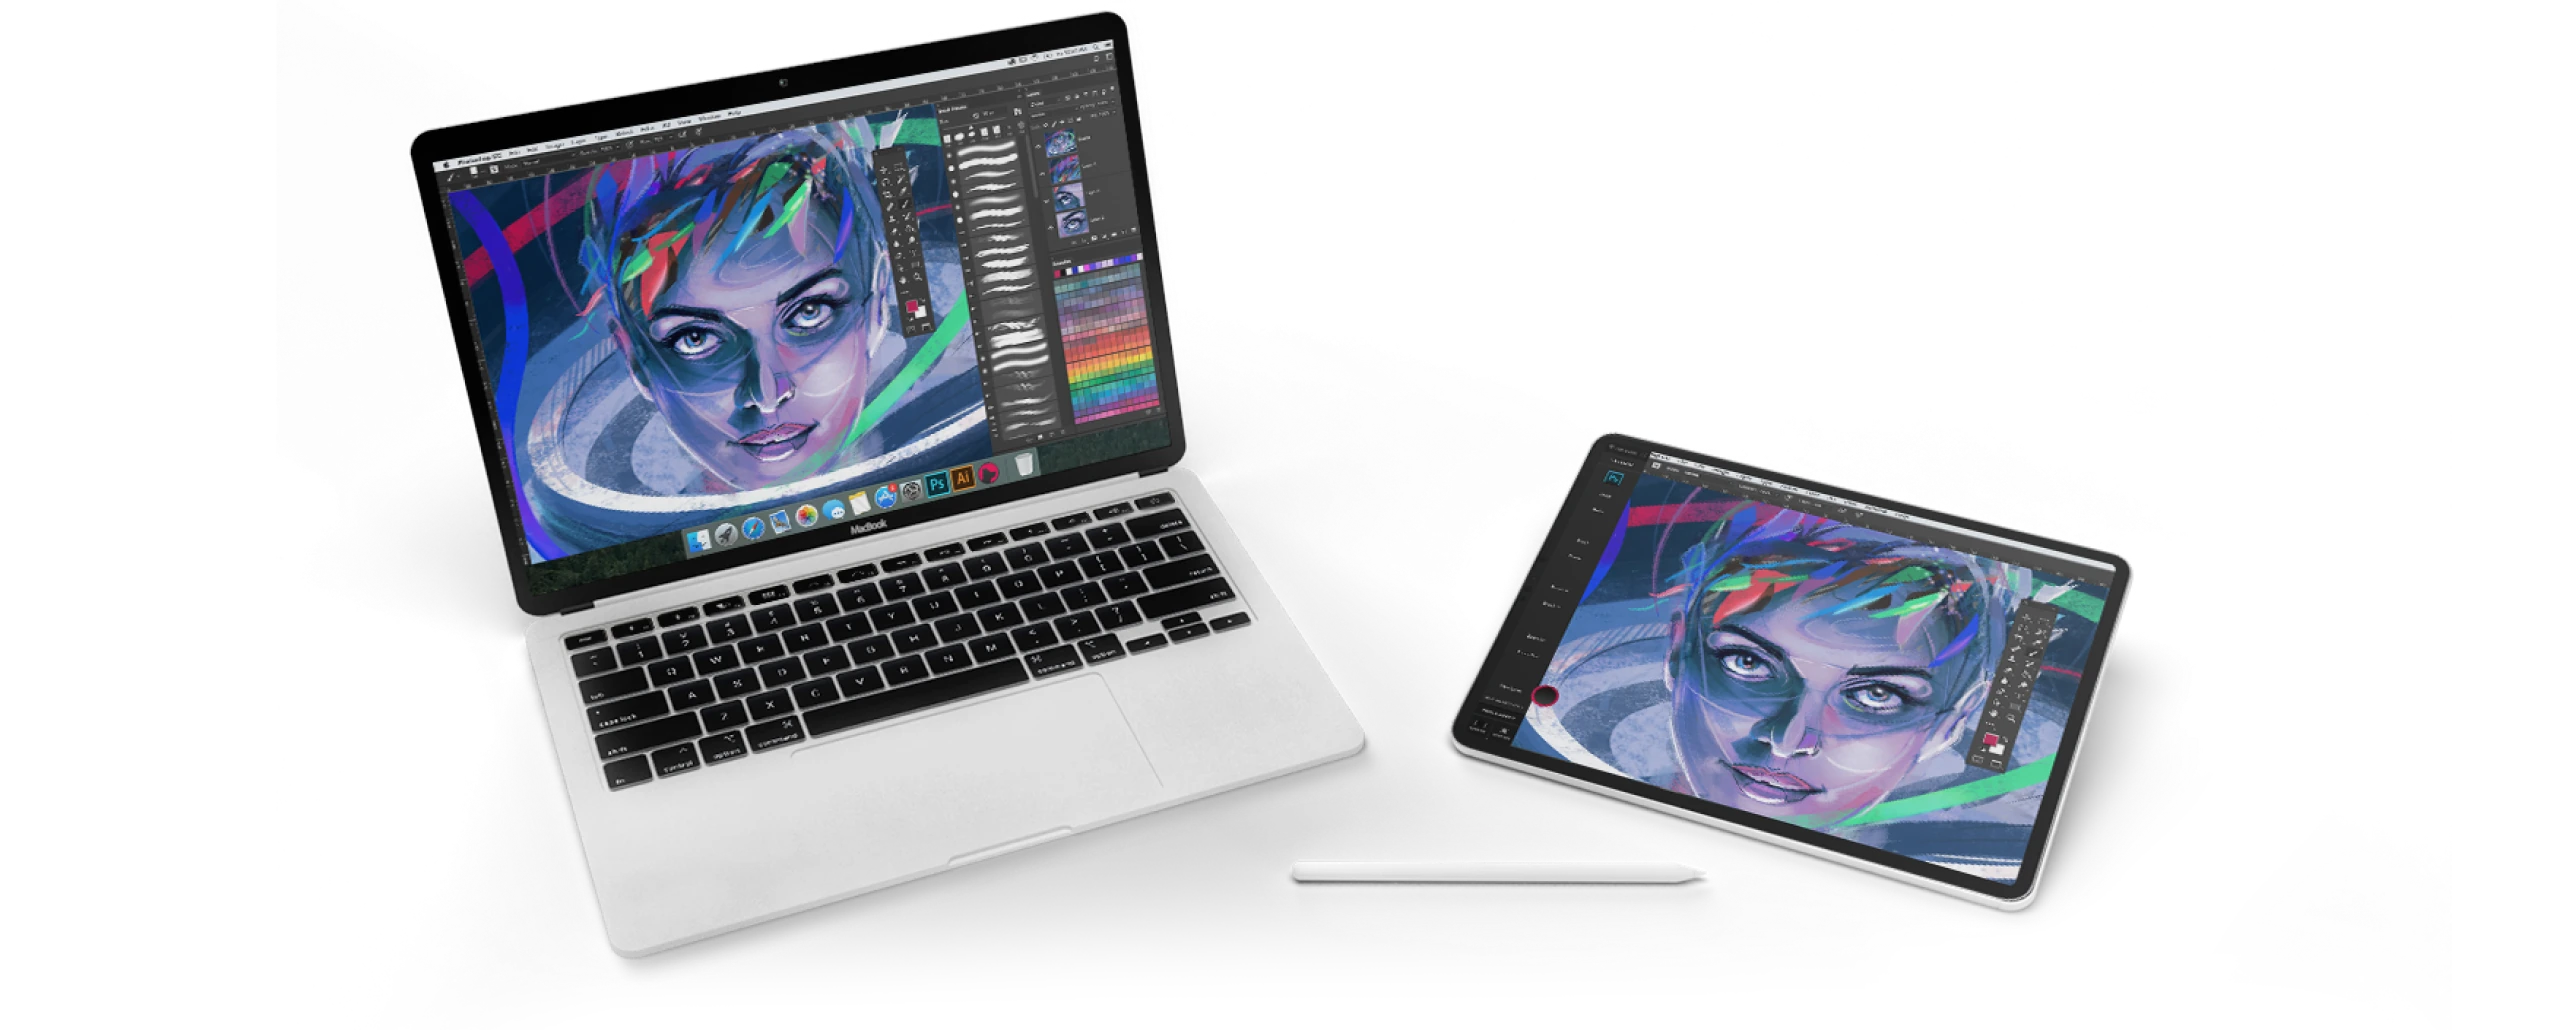 A Mac and iPad next to each other with an illustration of a woman on each device